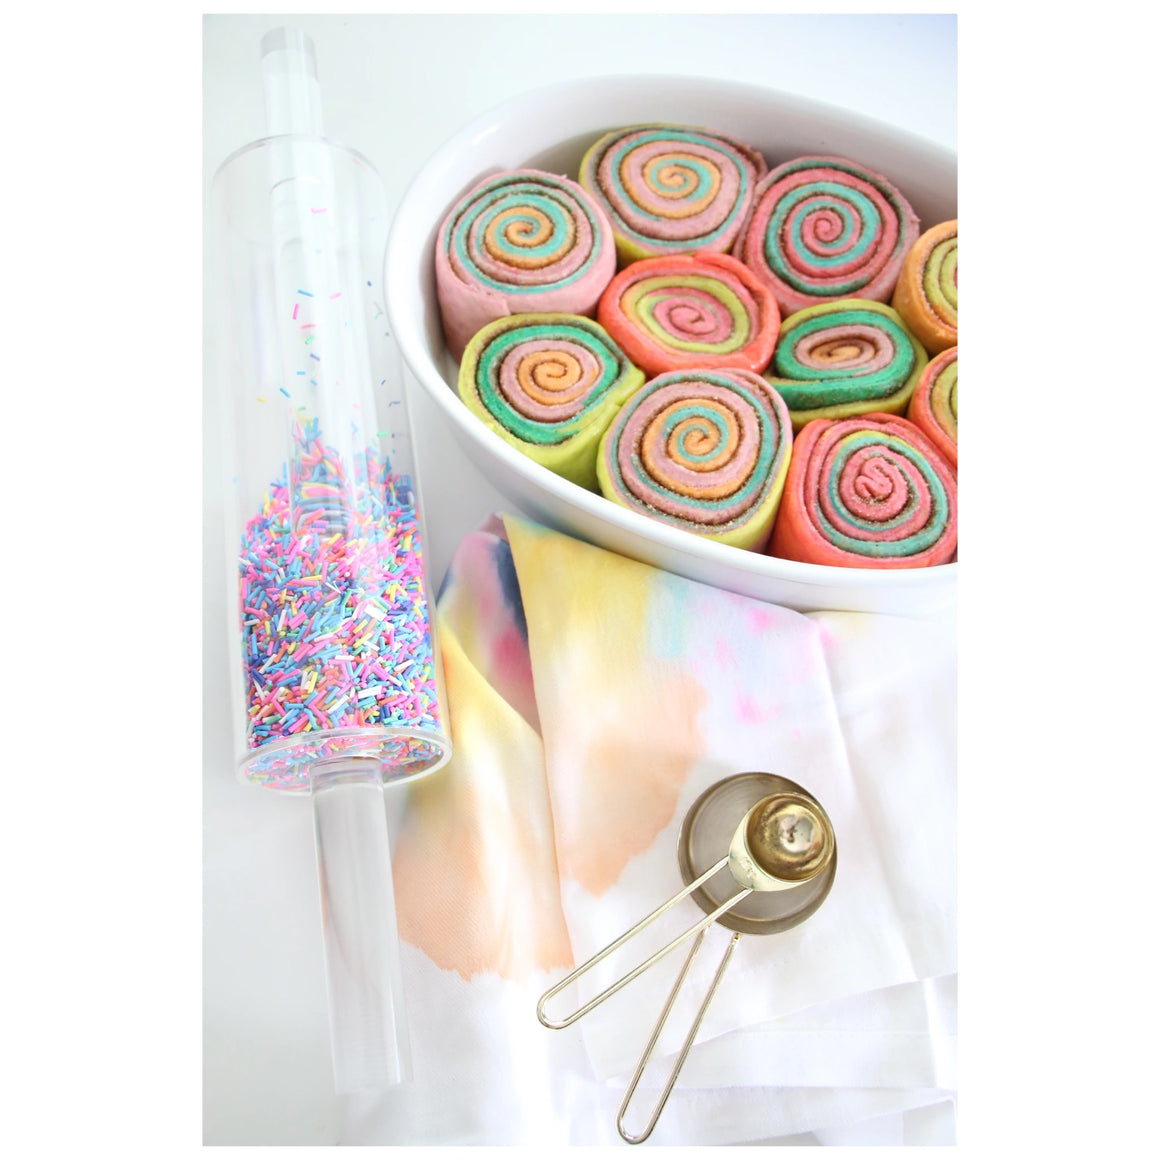 ROLLING PIN - ACRYLIC SPRINKLES